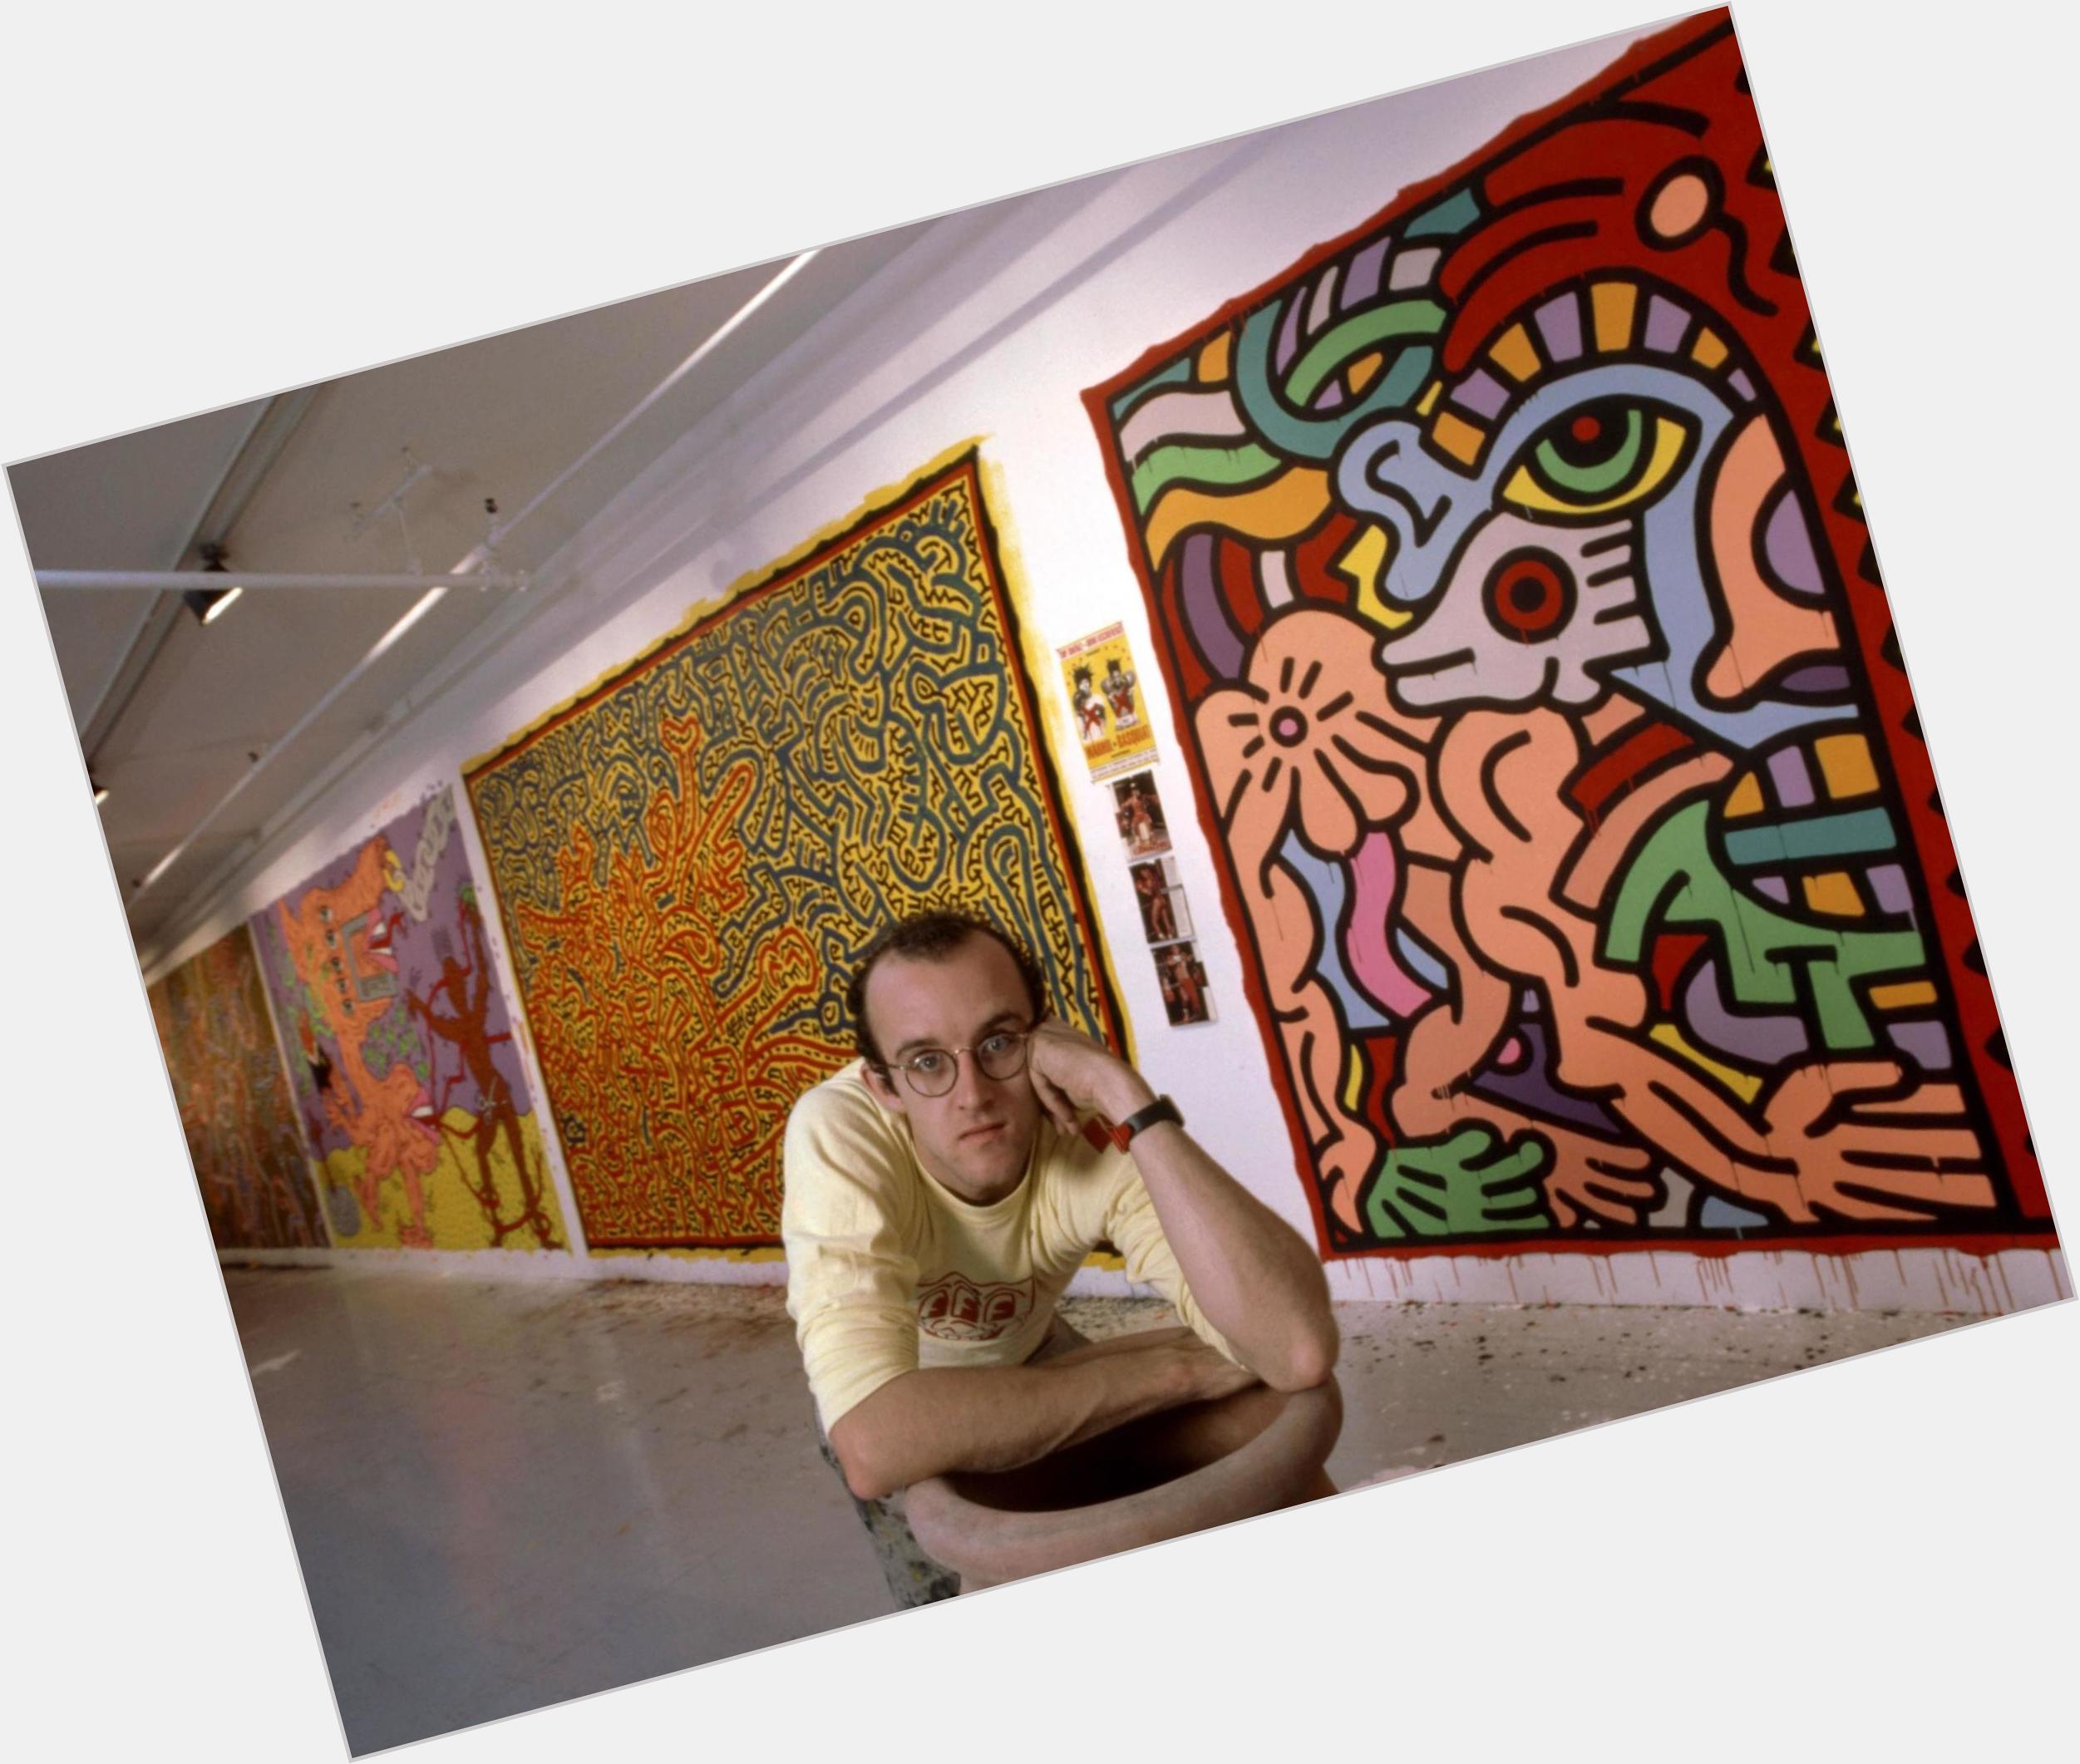 Http://fanpagepress.net/m/K/Keith Haring Marriage 4